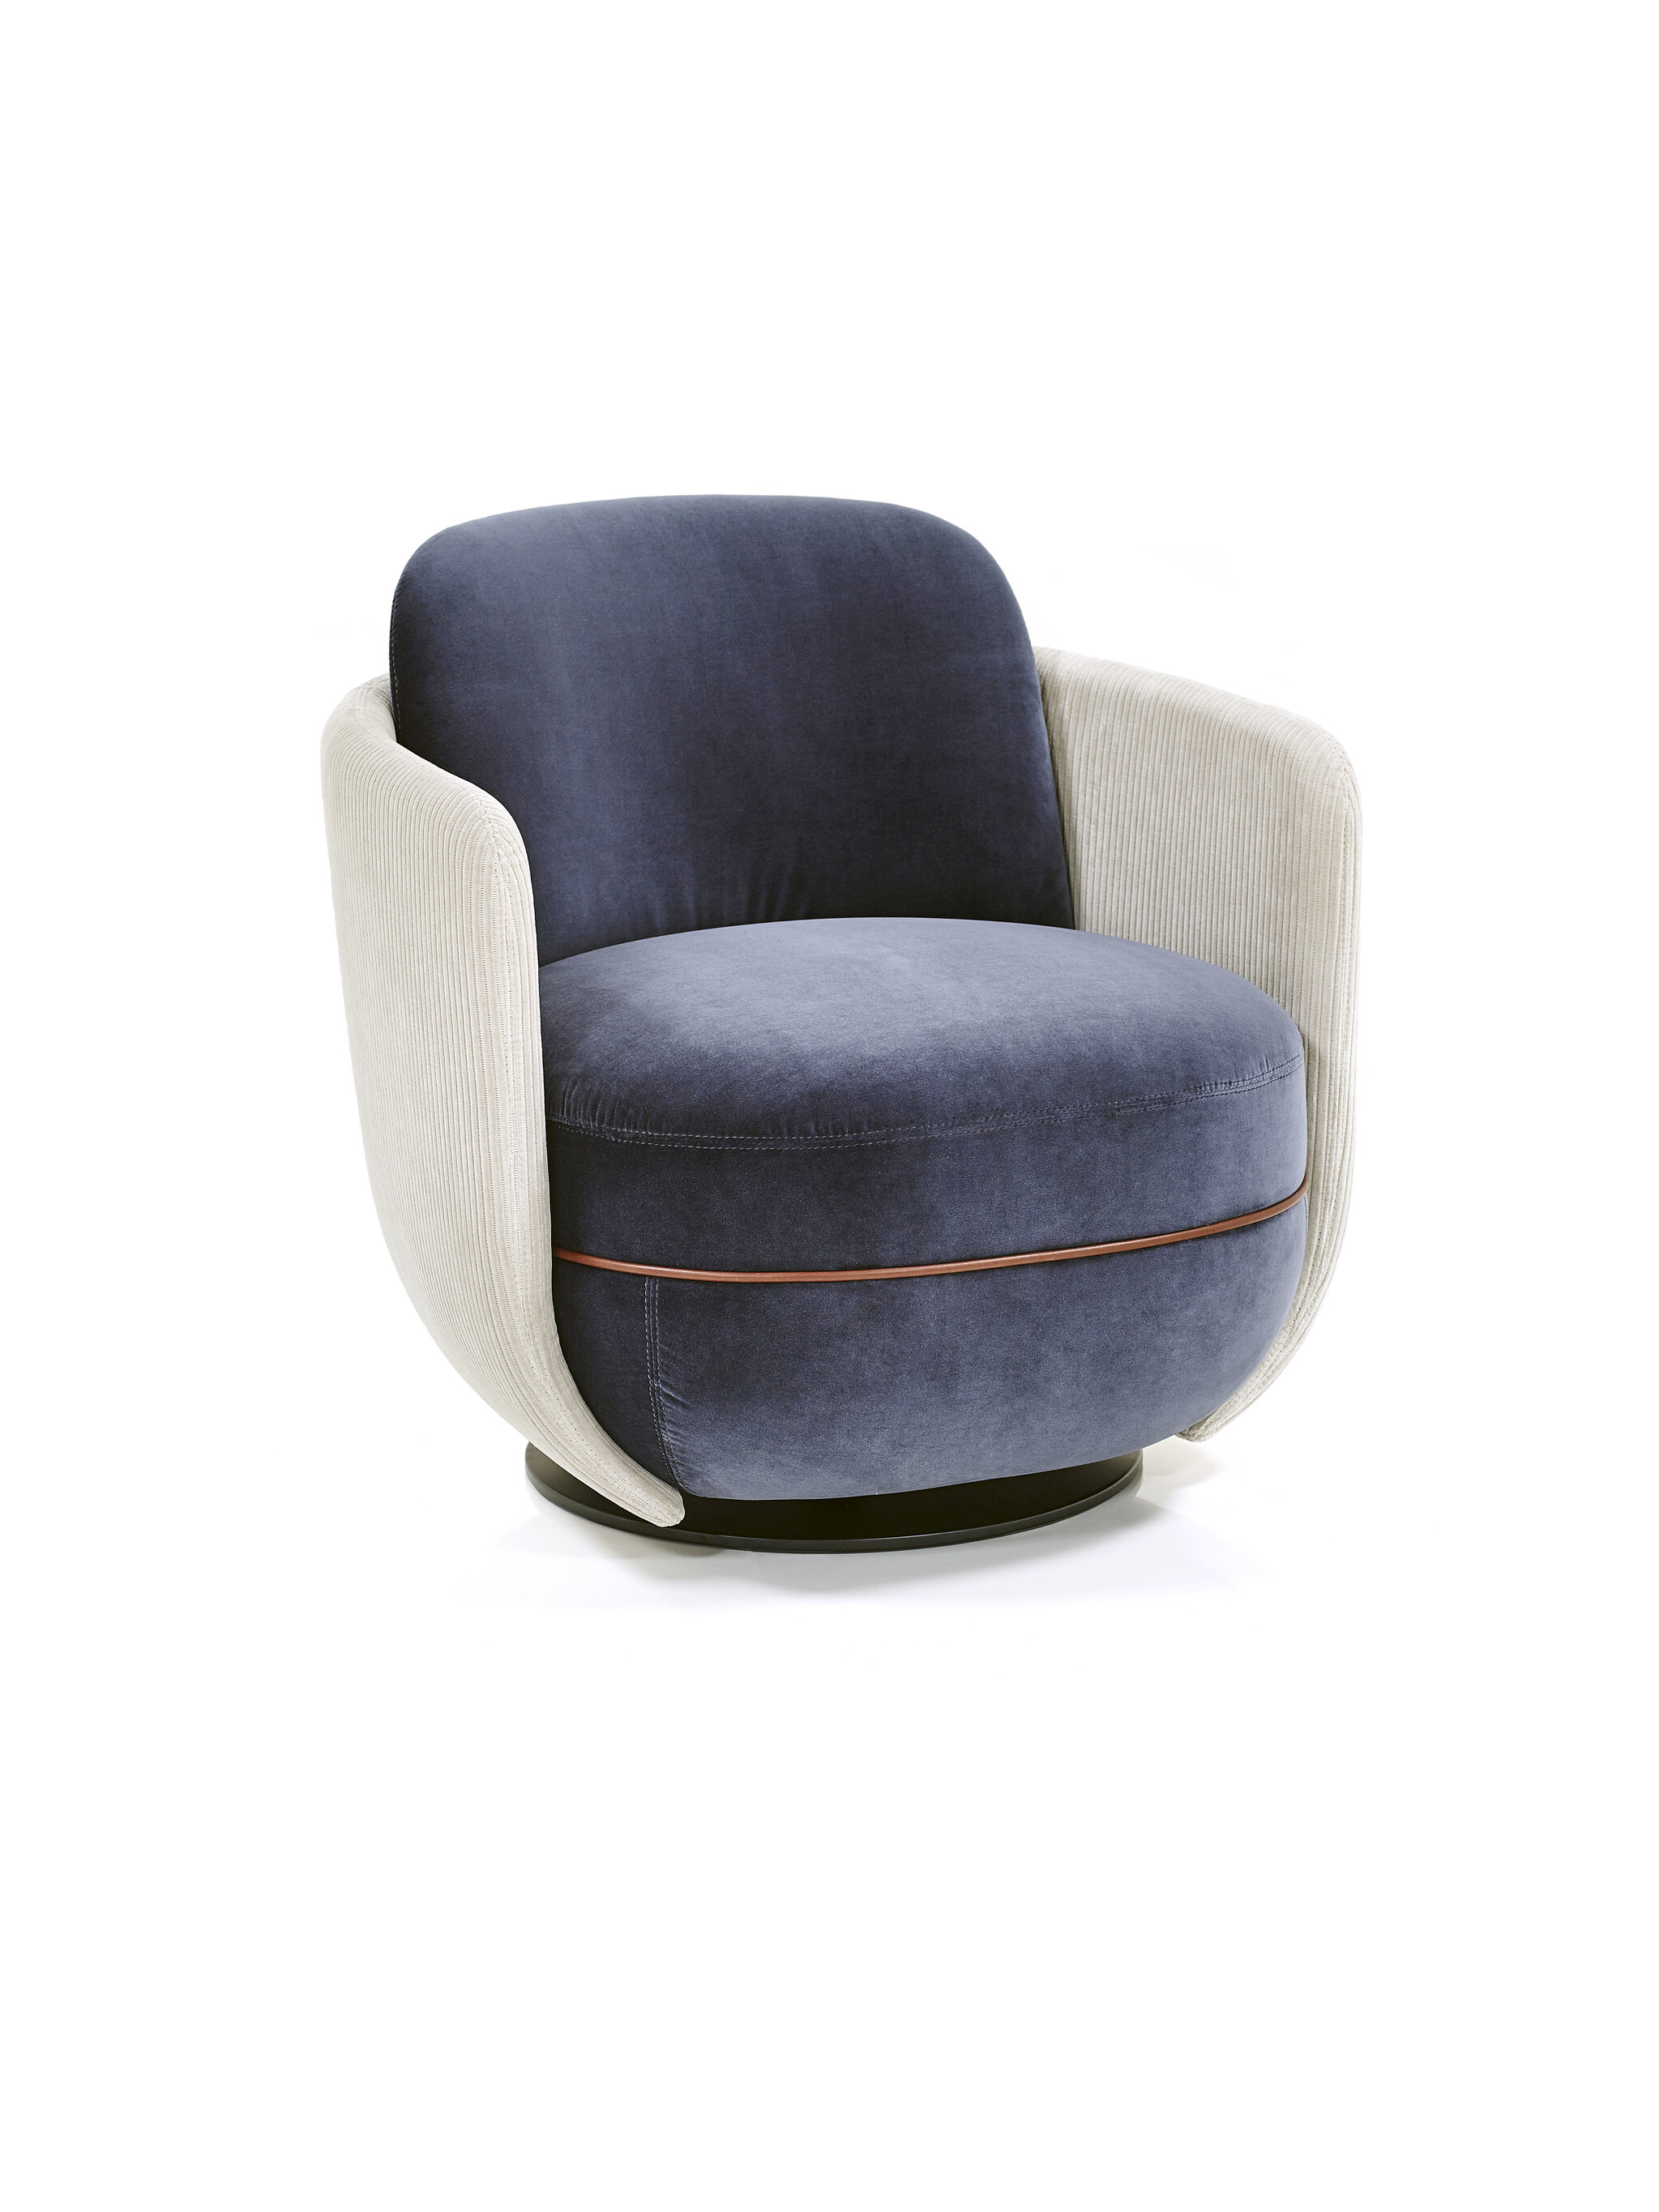 Miles fauteuil in two-legged design. Light armrest shell and blue seat with brown piping